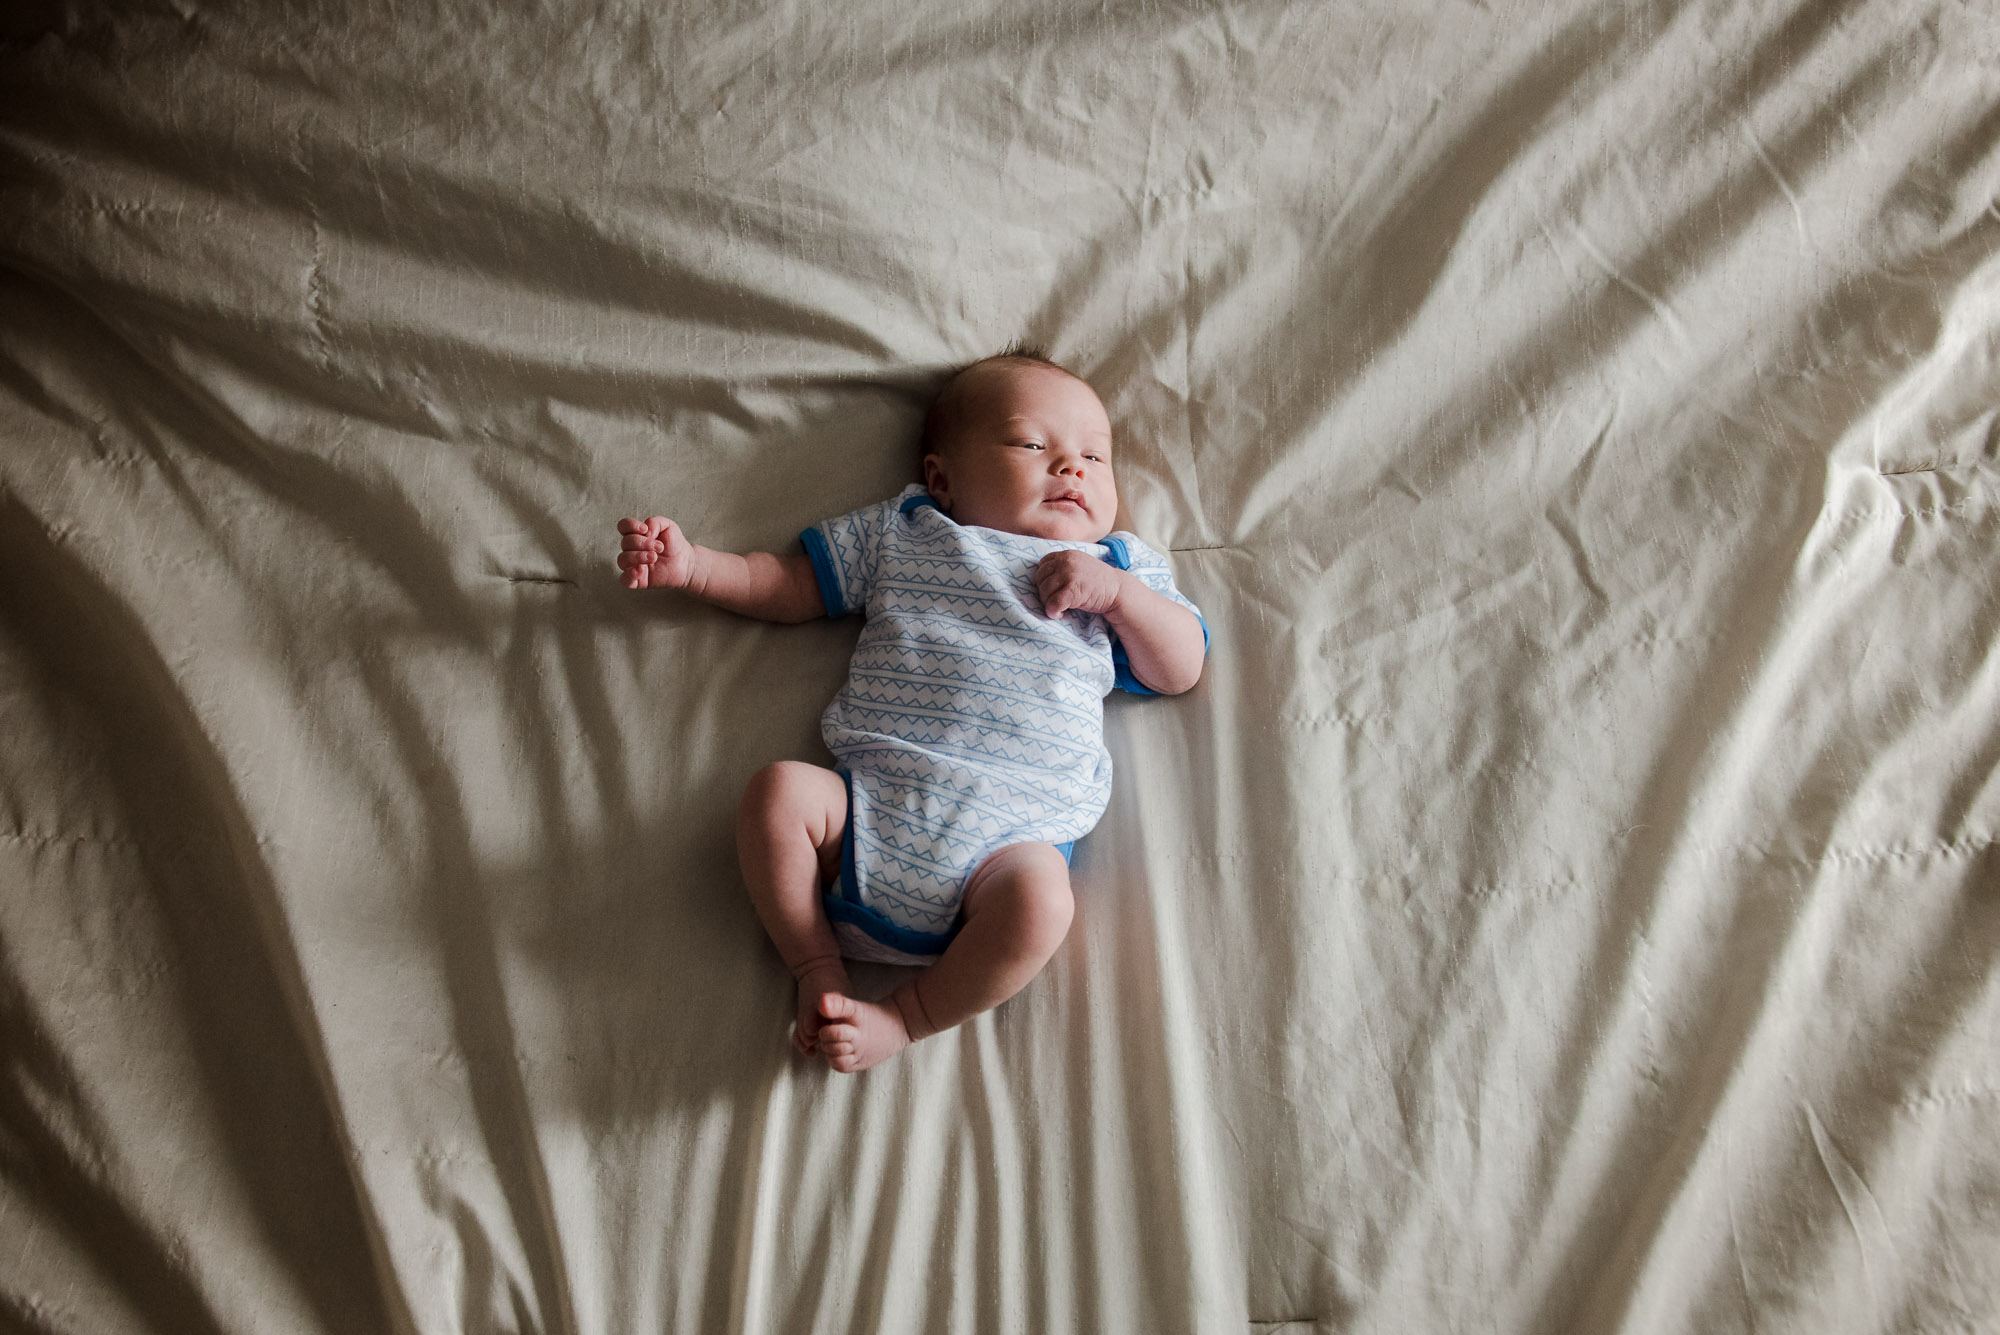 A newborn baby hangs out on a bed with crumpled sheets